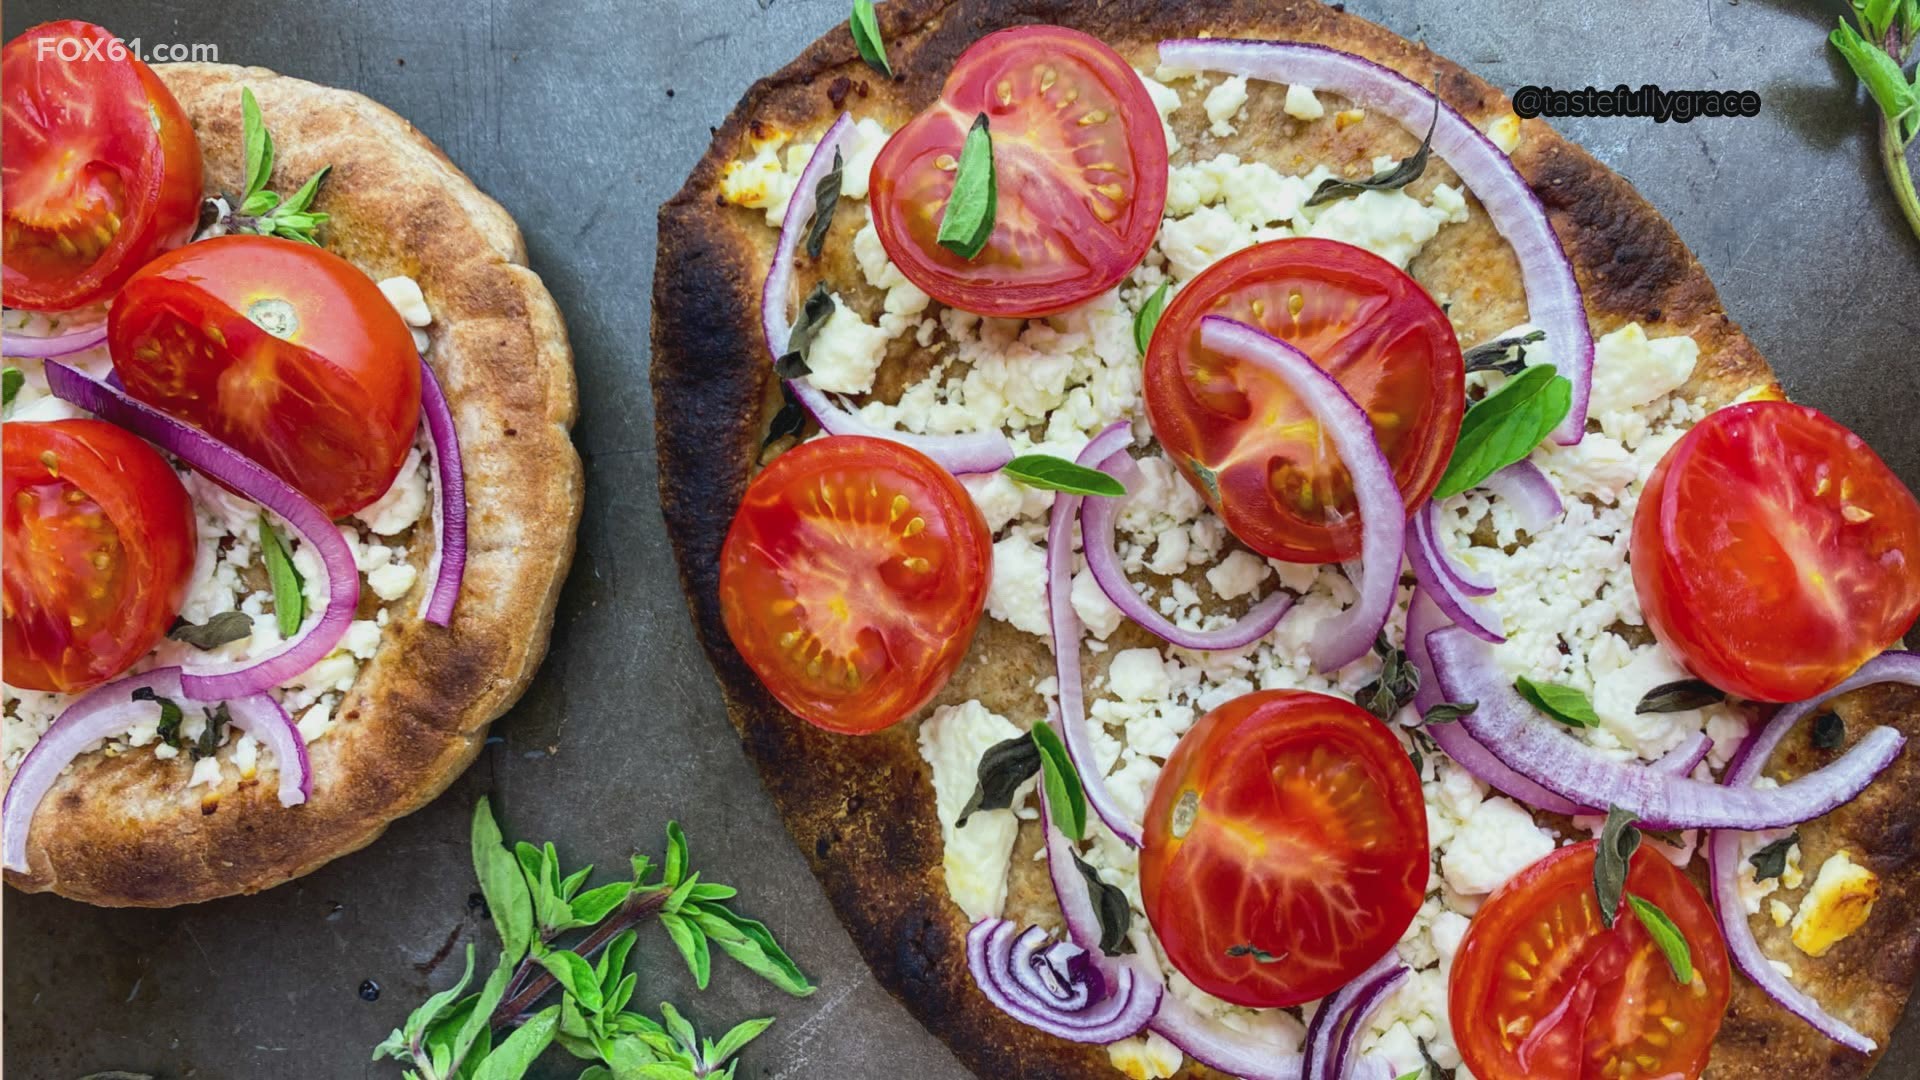 Learn how to make your own pita bread pizzas!